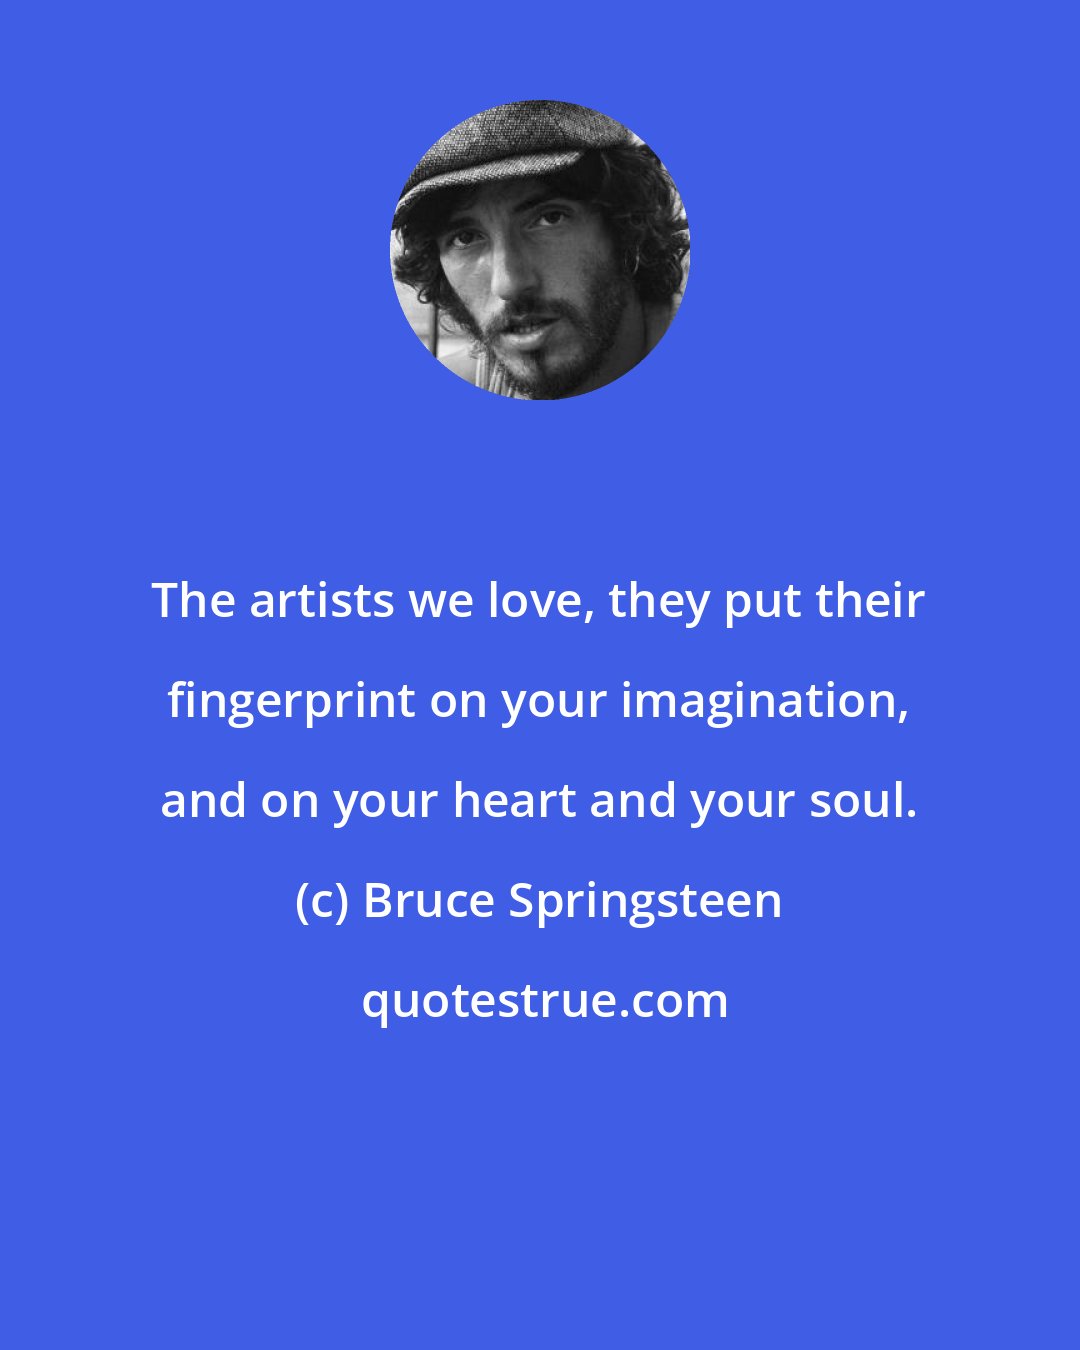 Bruce Springsteen: The artists we love, they put their fingerprint on your imagination, and on your heart and your soul.